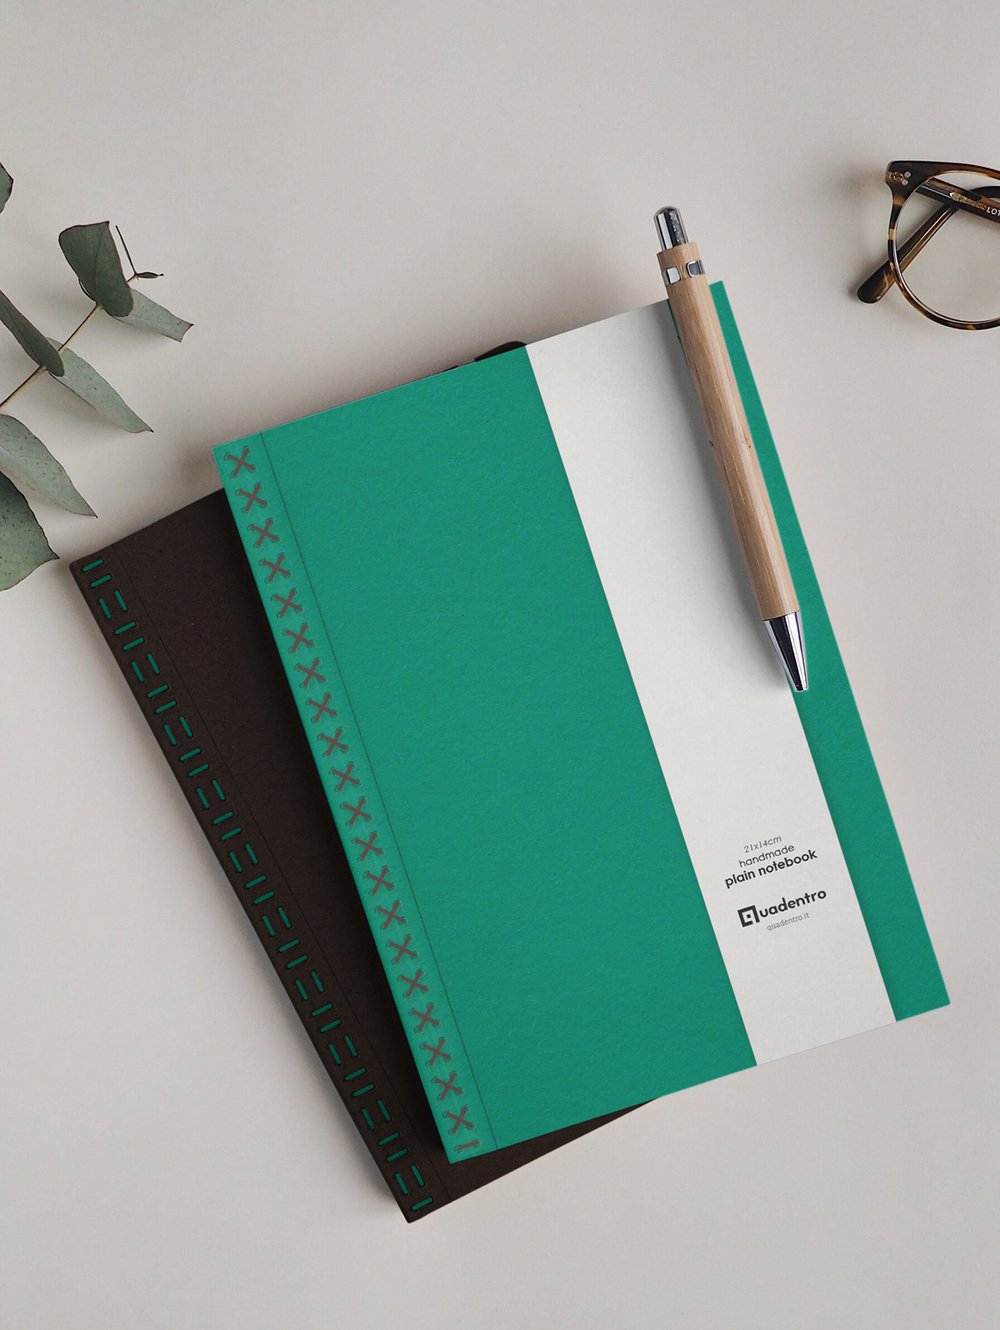 “Quadentro” notebook in A5 format with green cover. — Milan Icons